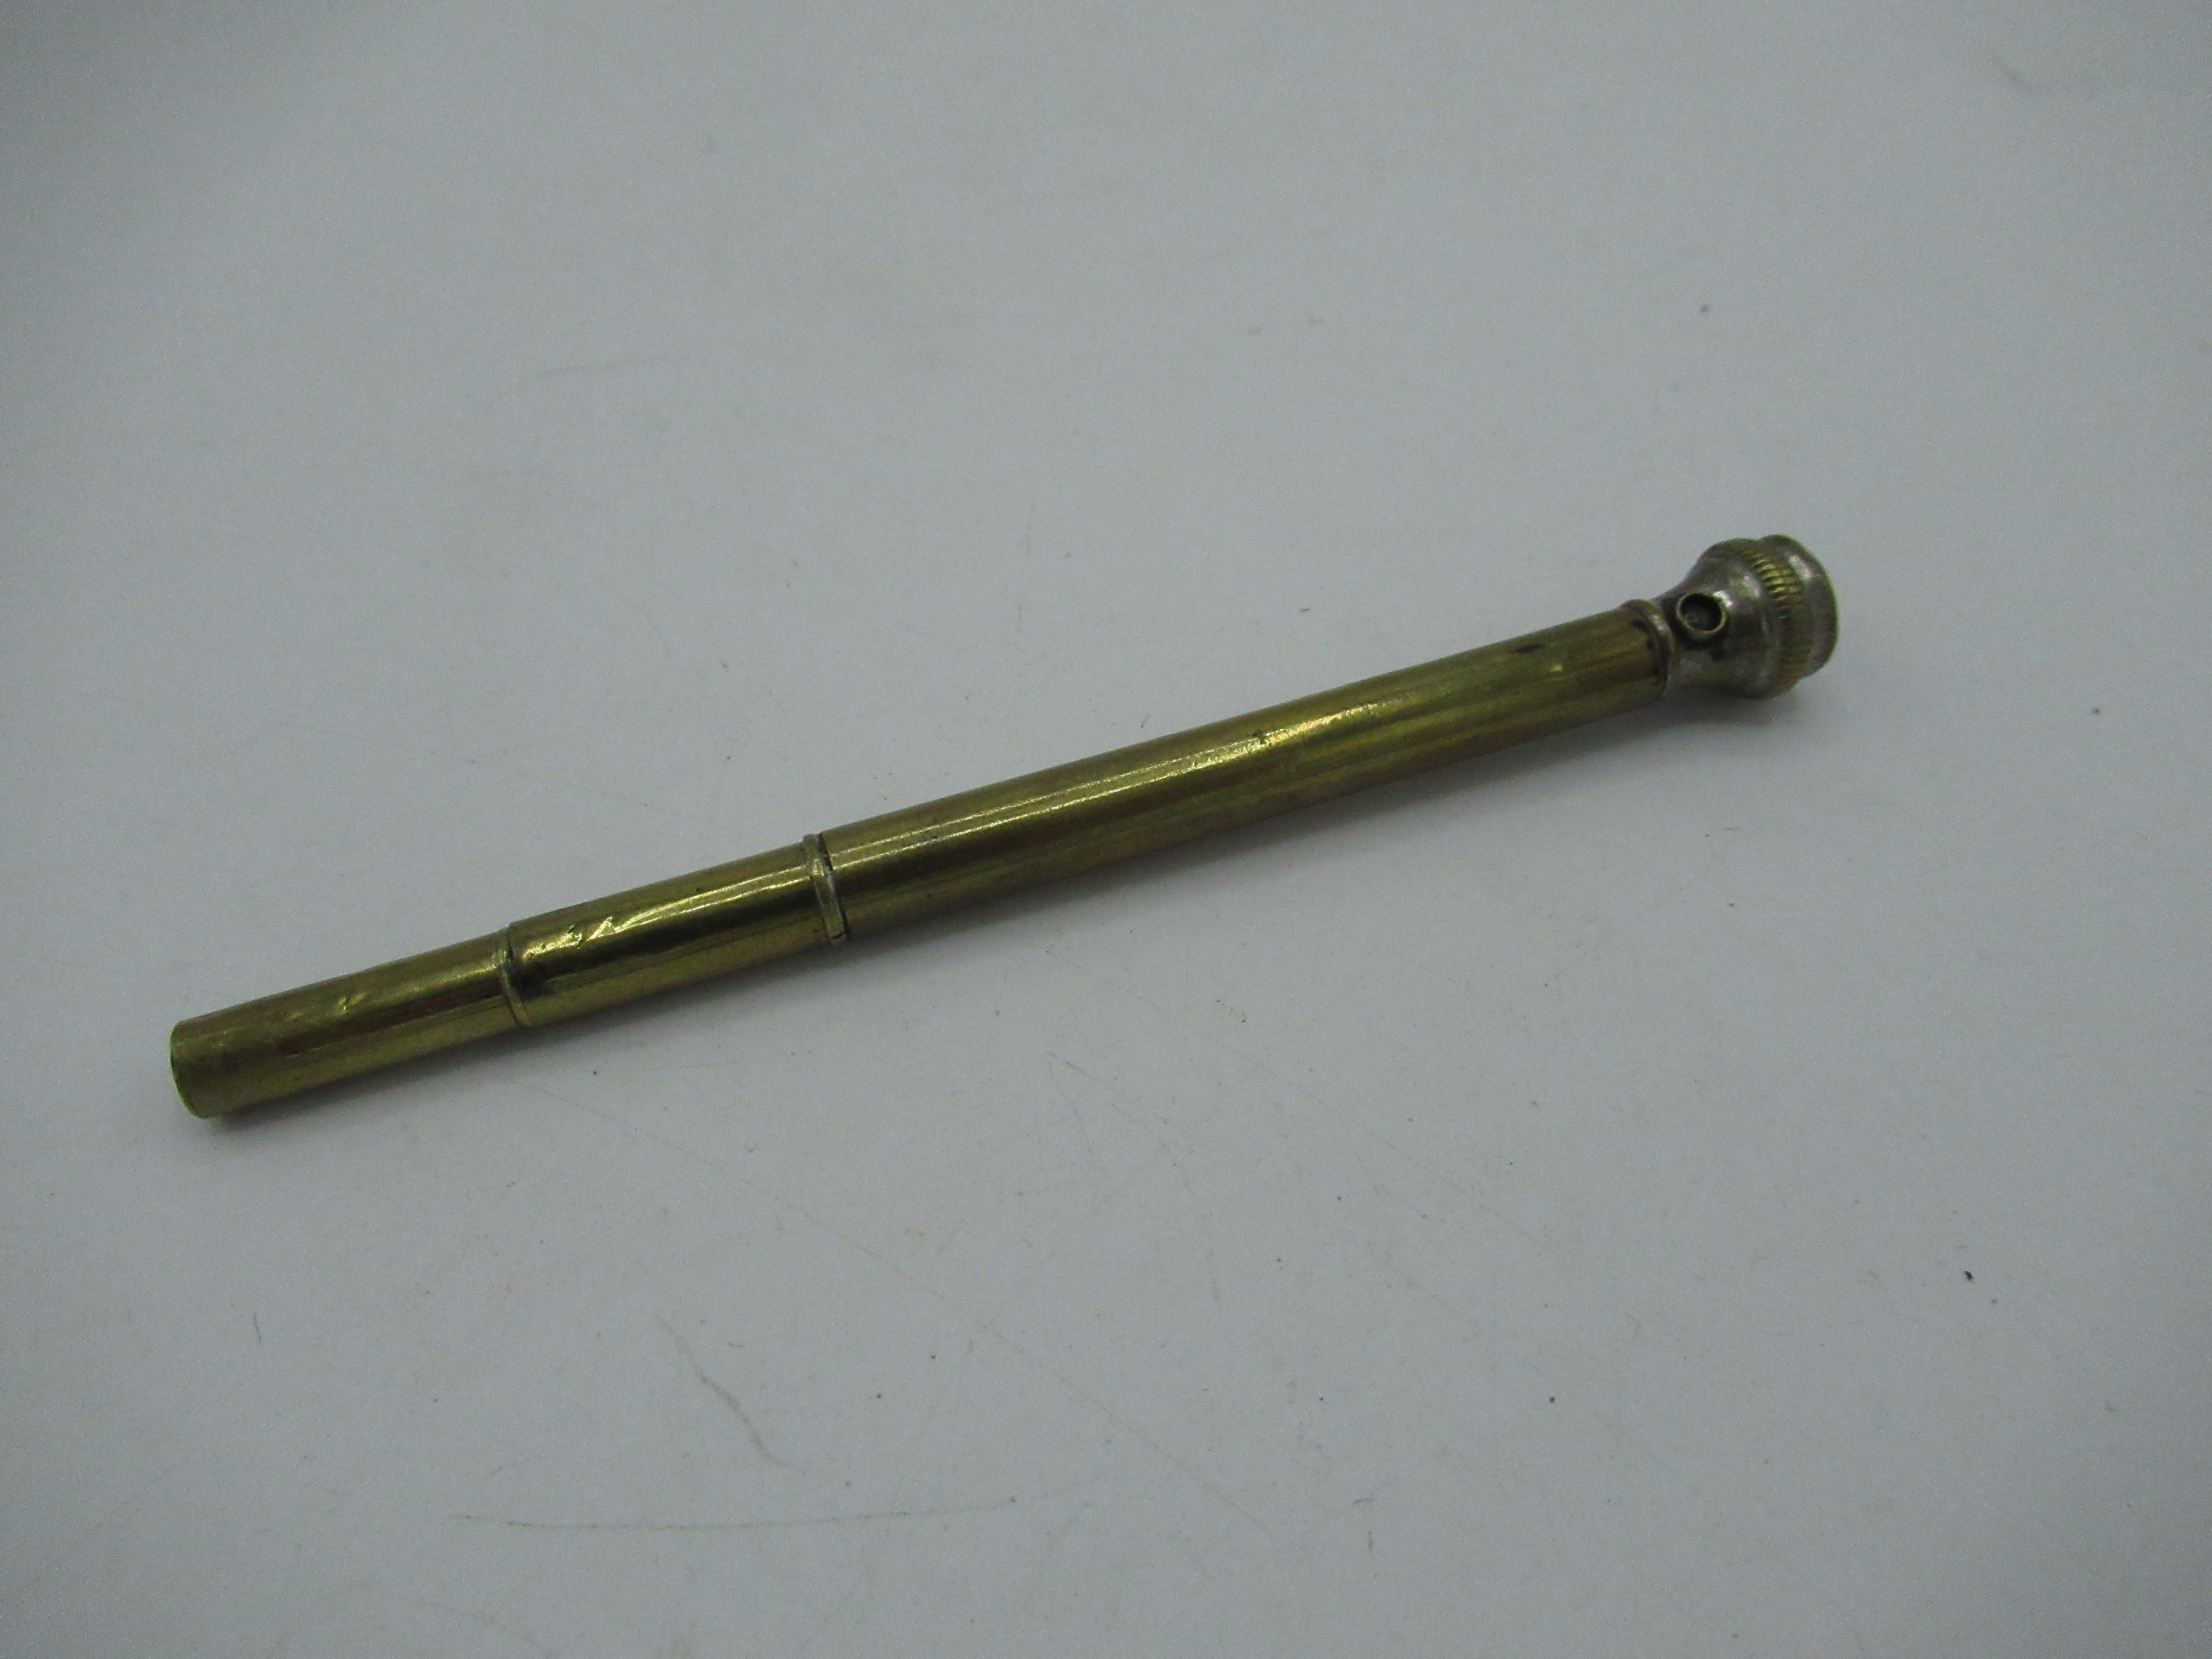 A brass propelling pencil